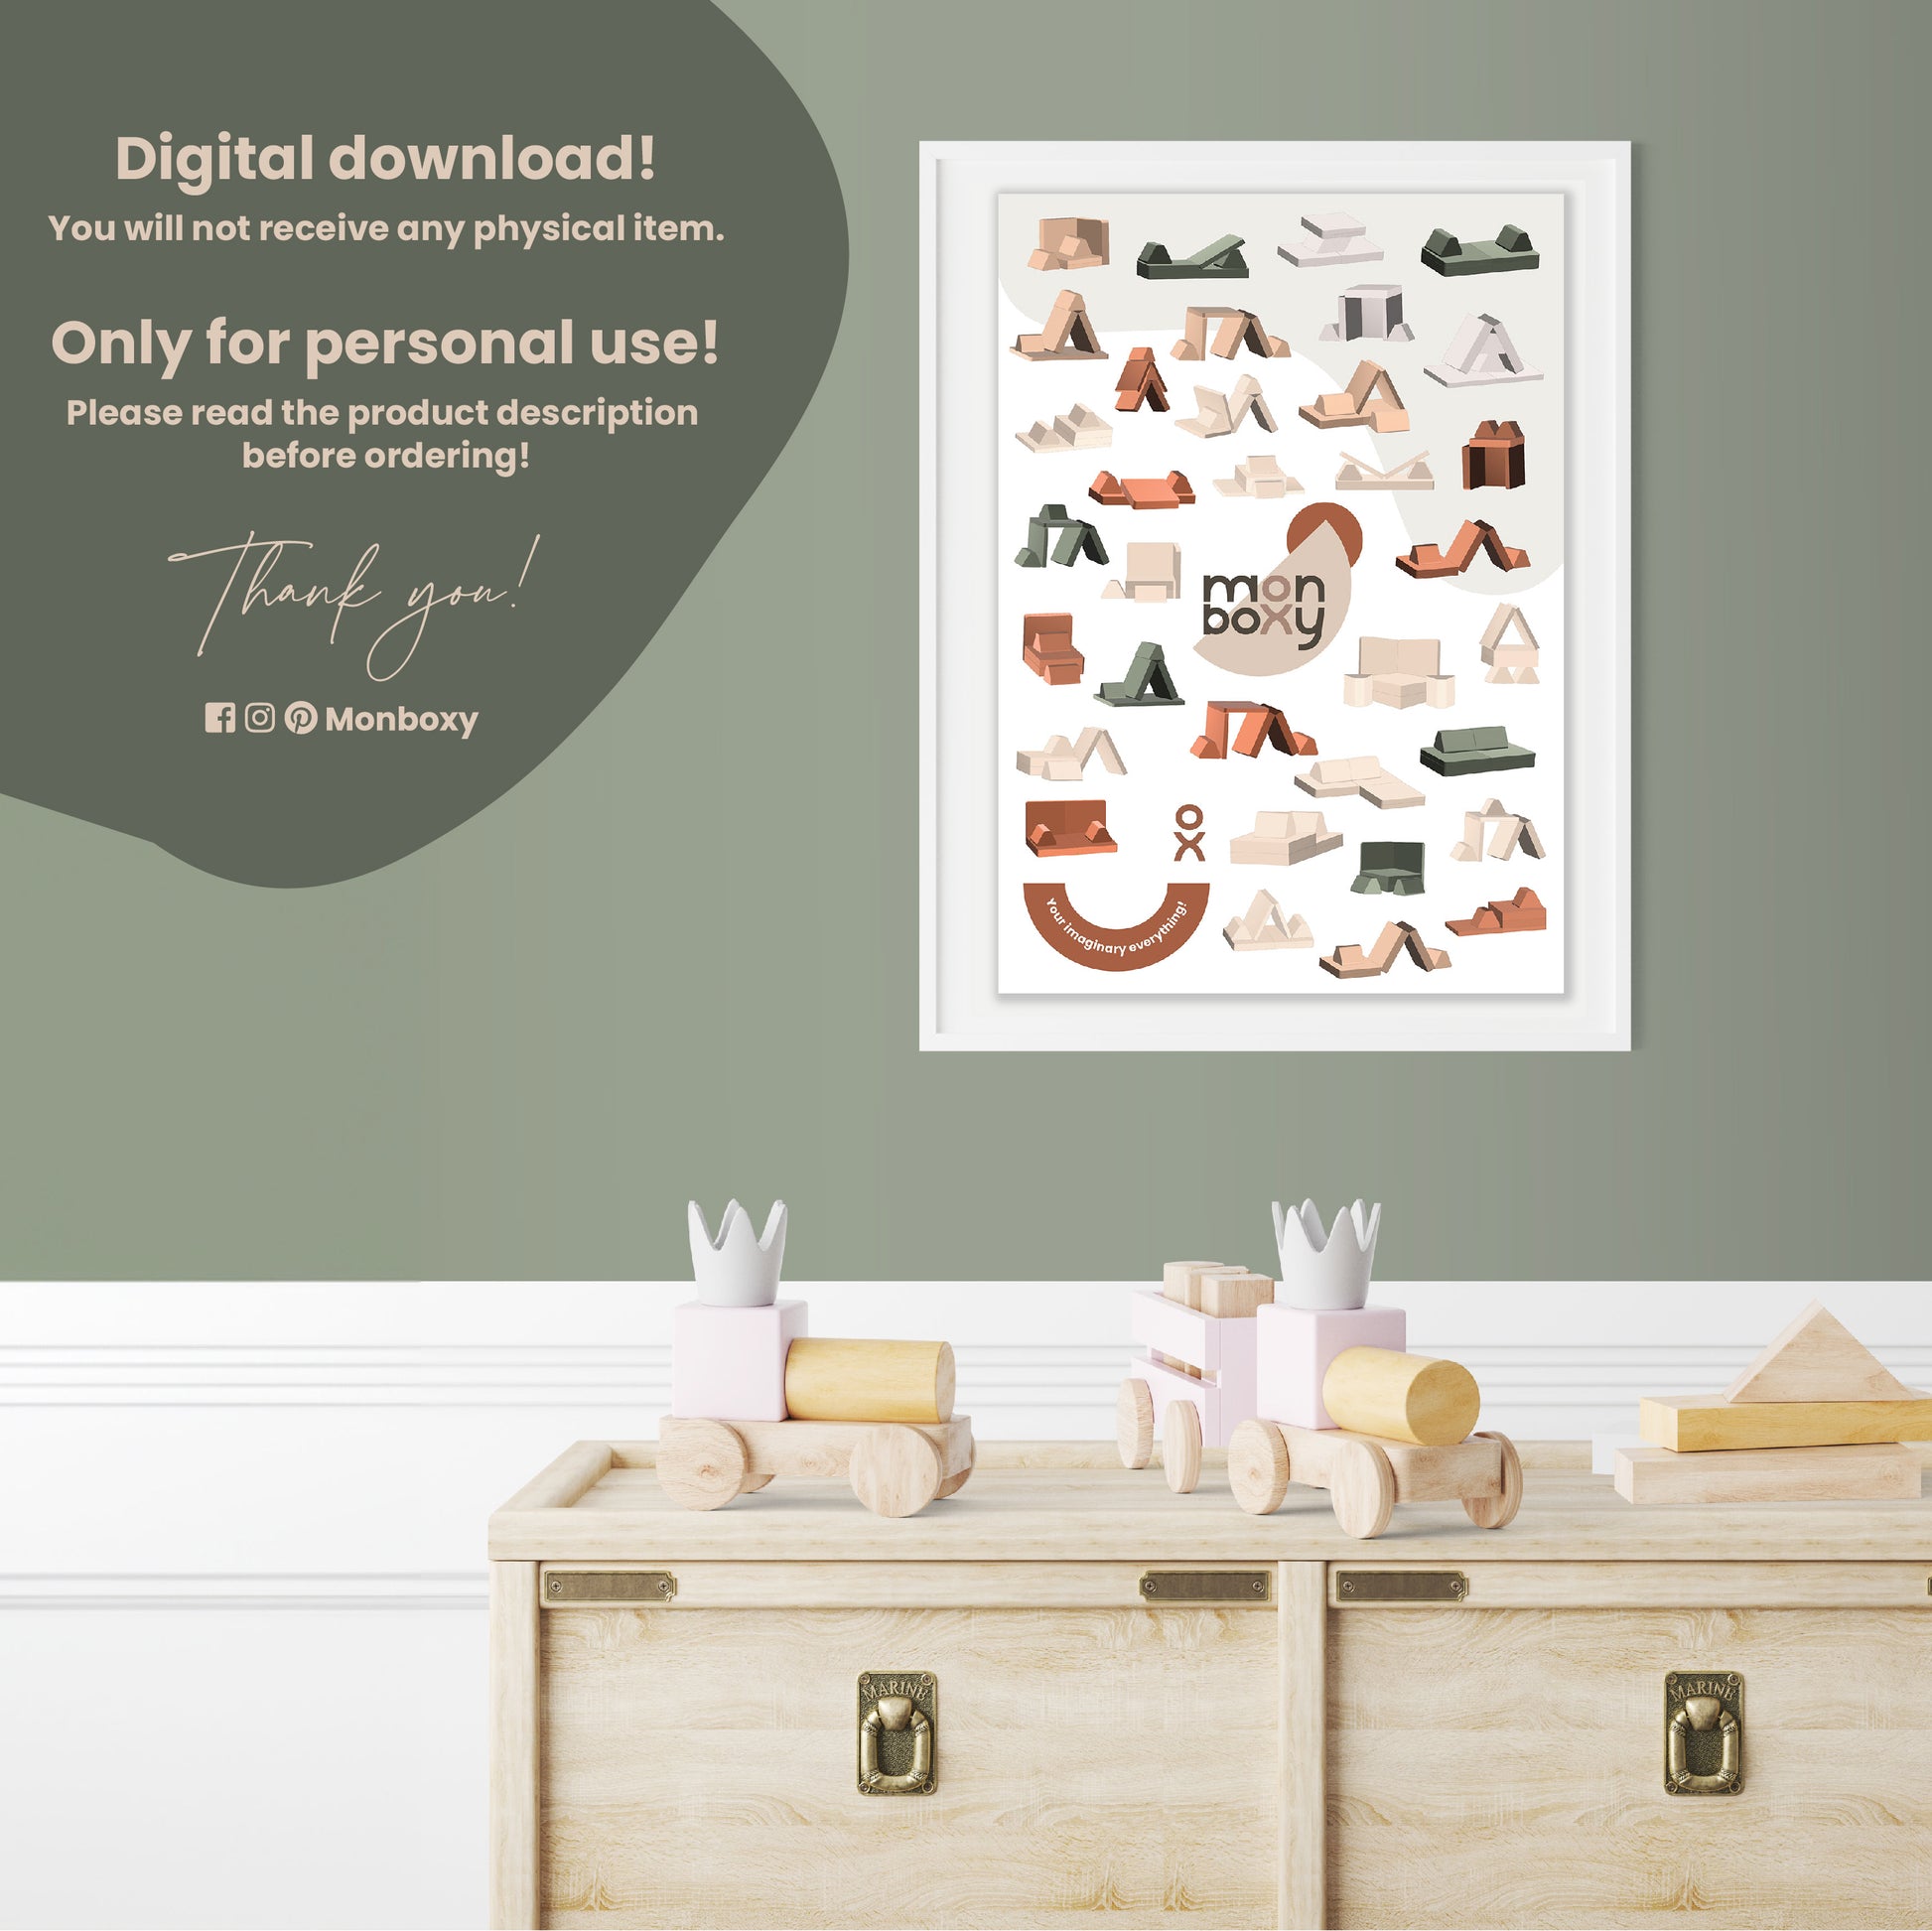 An image of a child's room with foam blocks set for kids, toys, and a Activity sofa build ideas poster - Muted colors | digital download by Sweet HOME from wood.